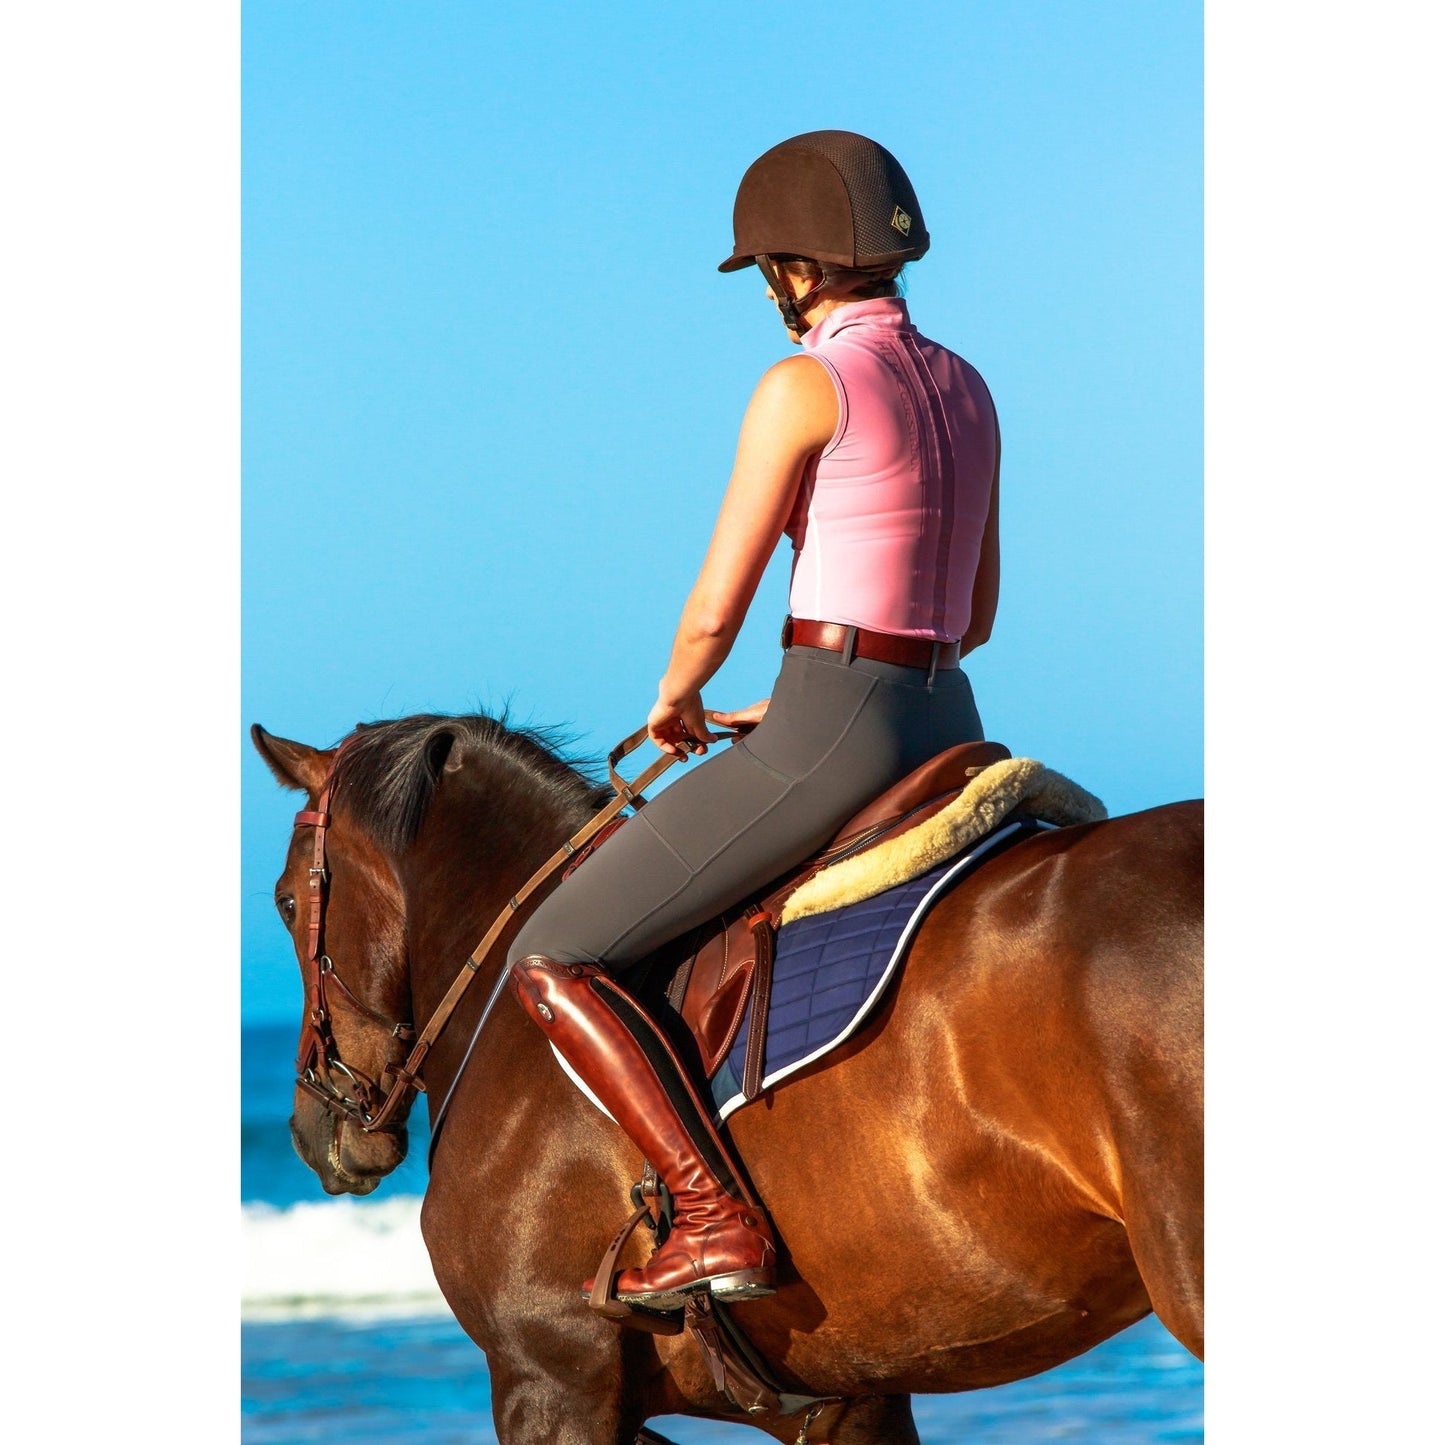 Rider in helmet and horse riding tights on horseback by sea.